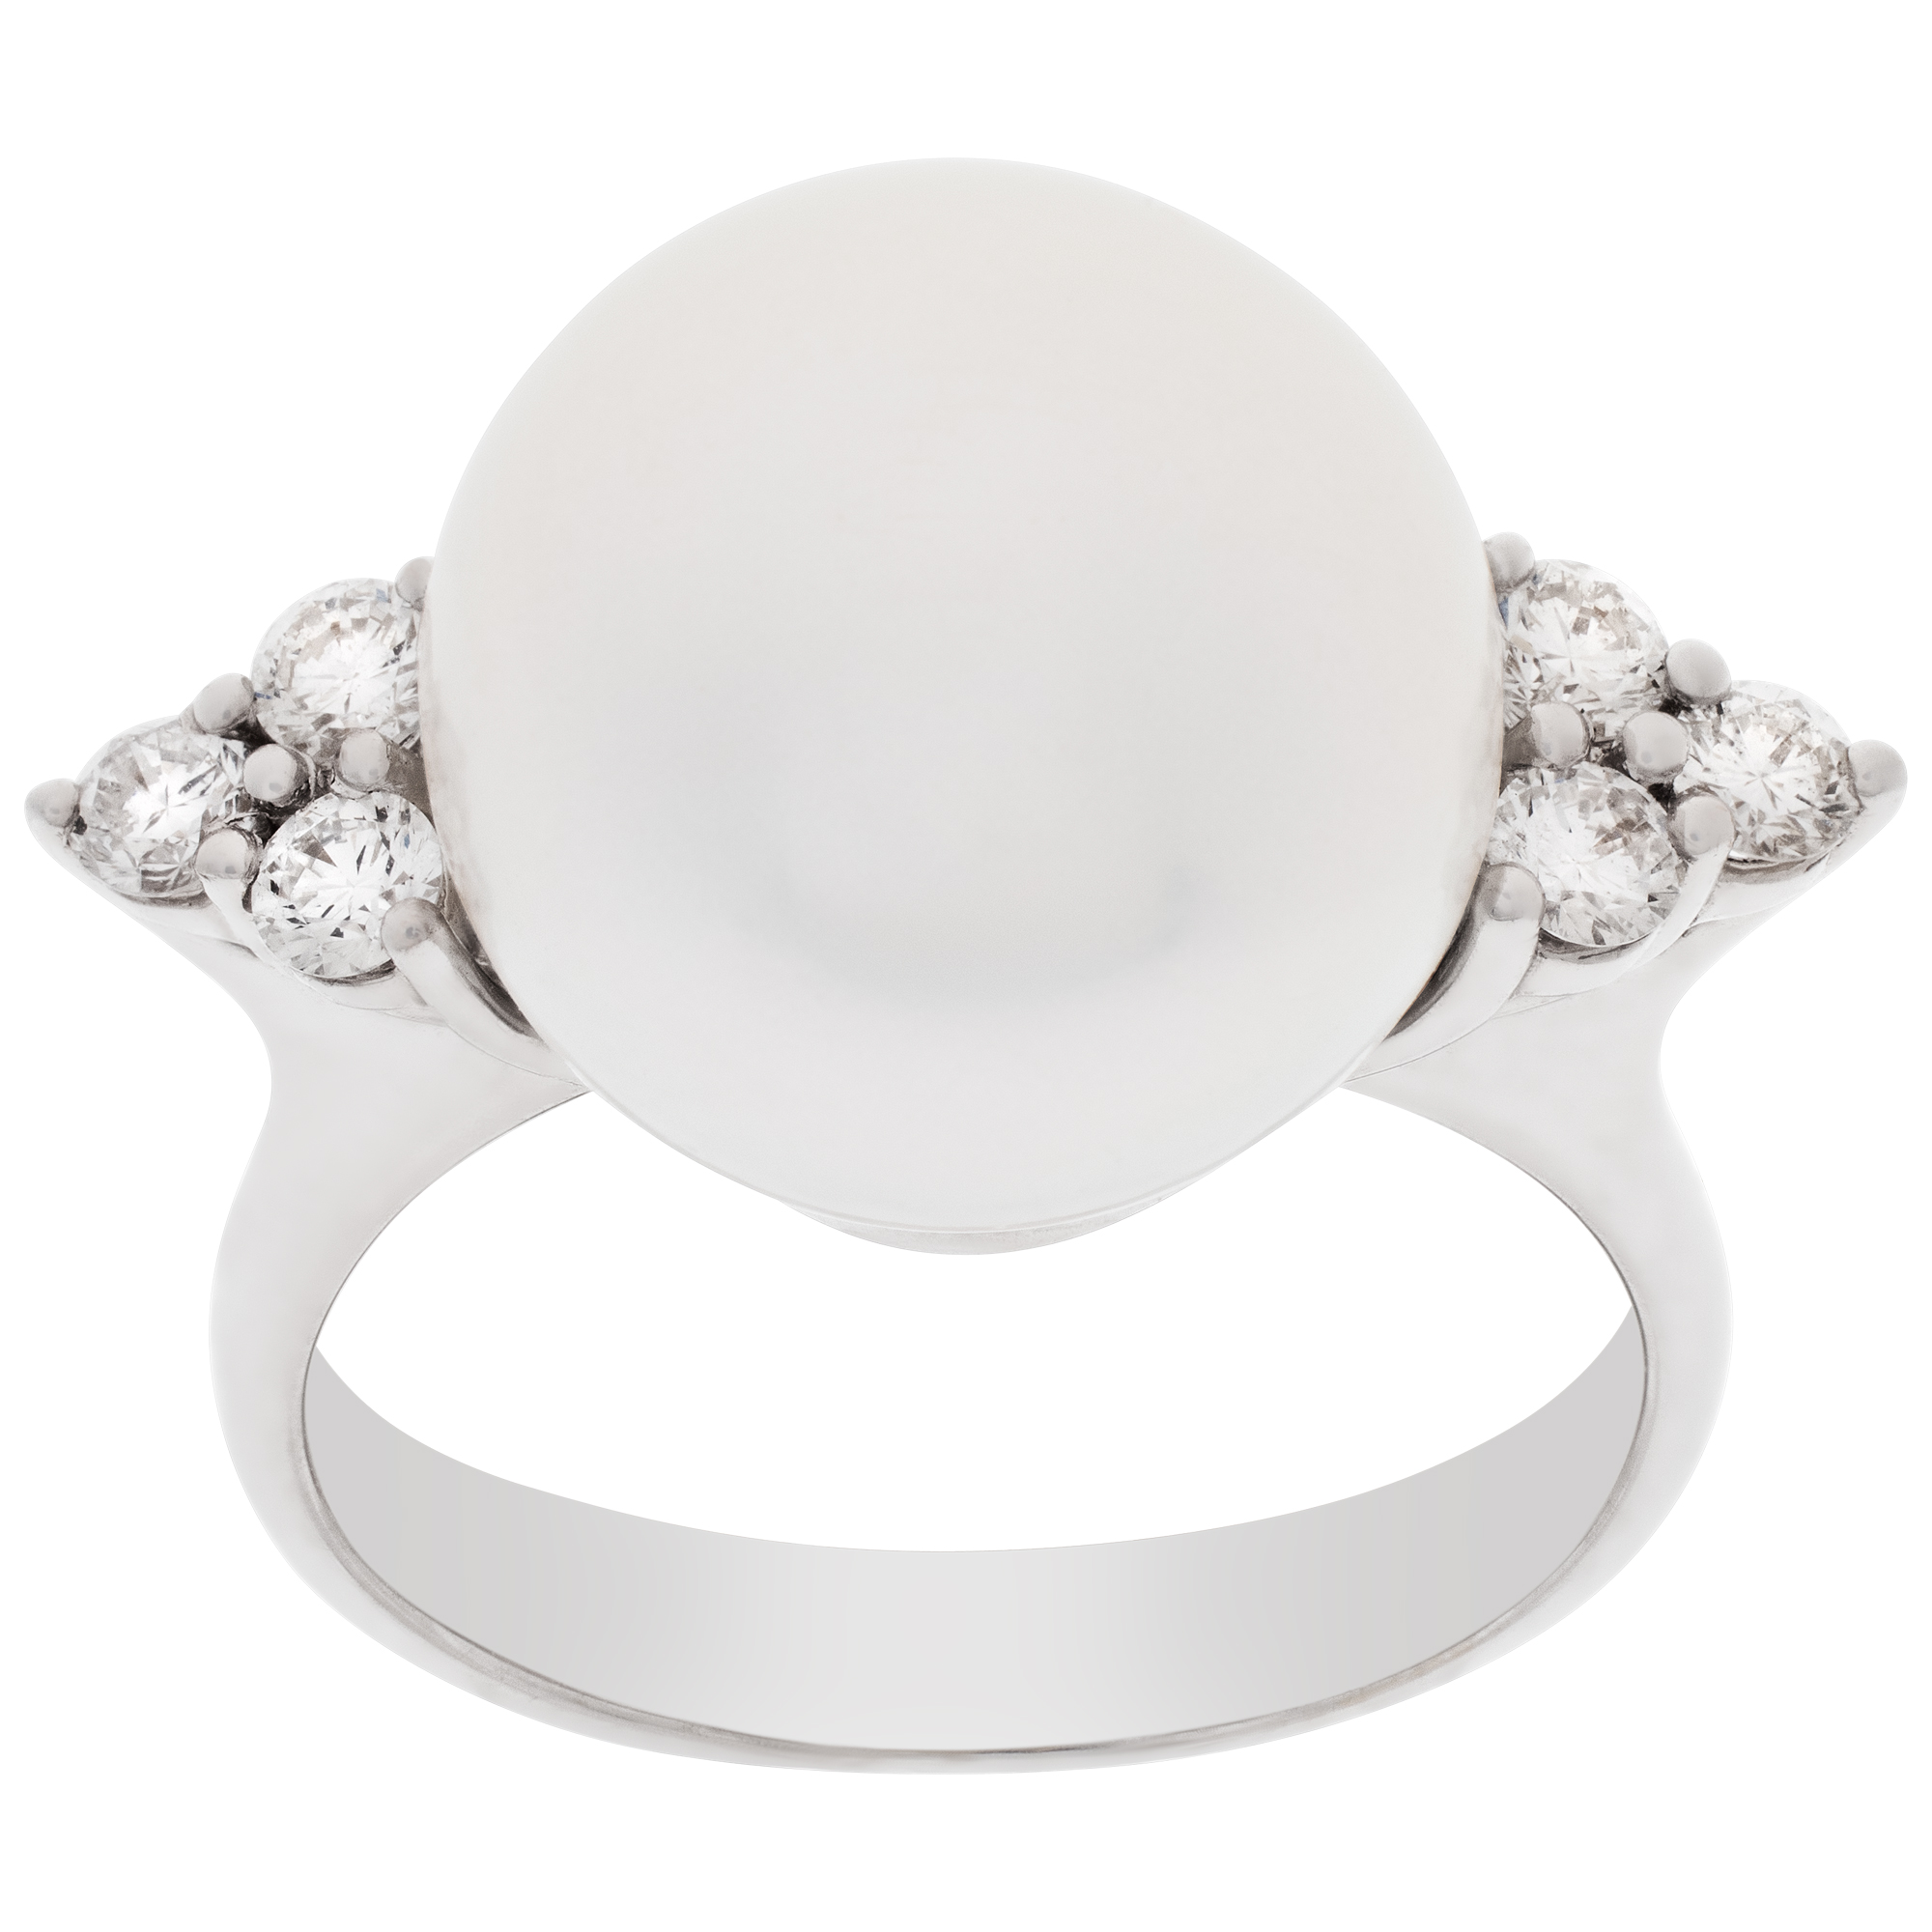 South Sea pearl & diamonds ring set in 18K white gold. Size 6.75